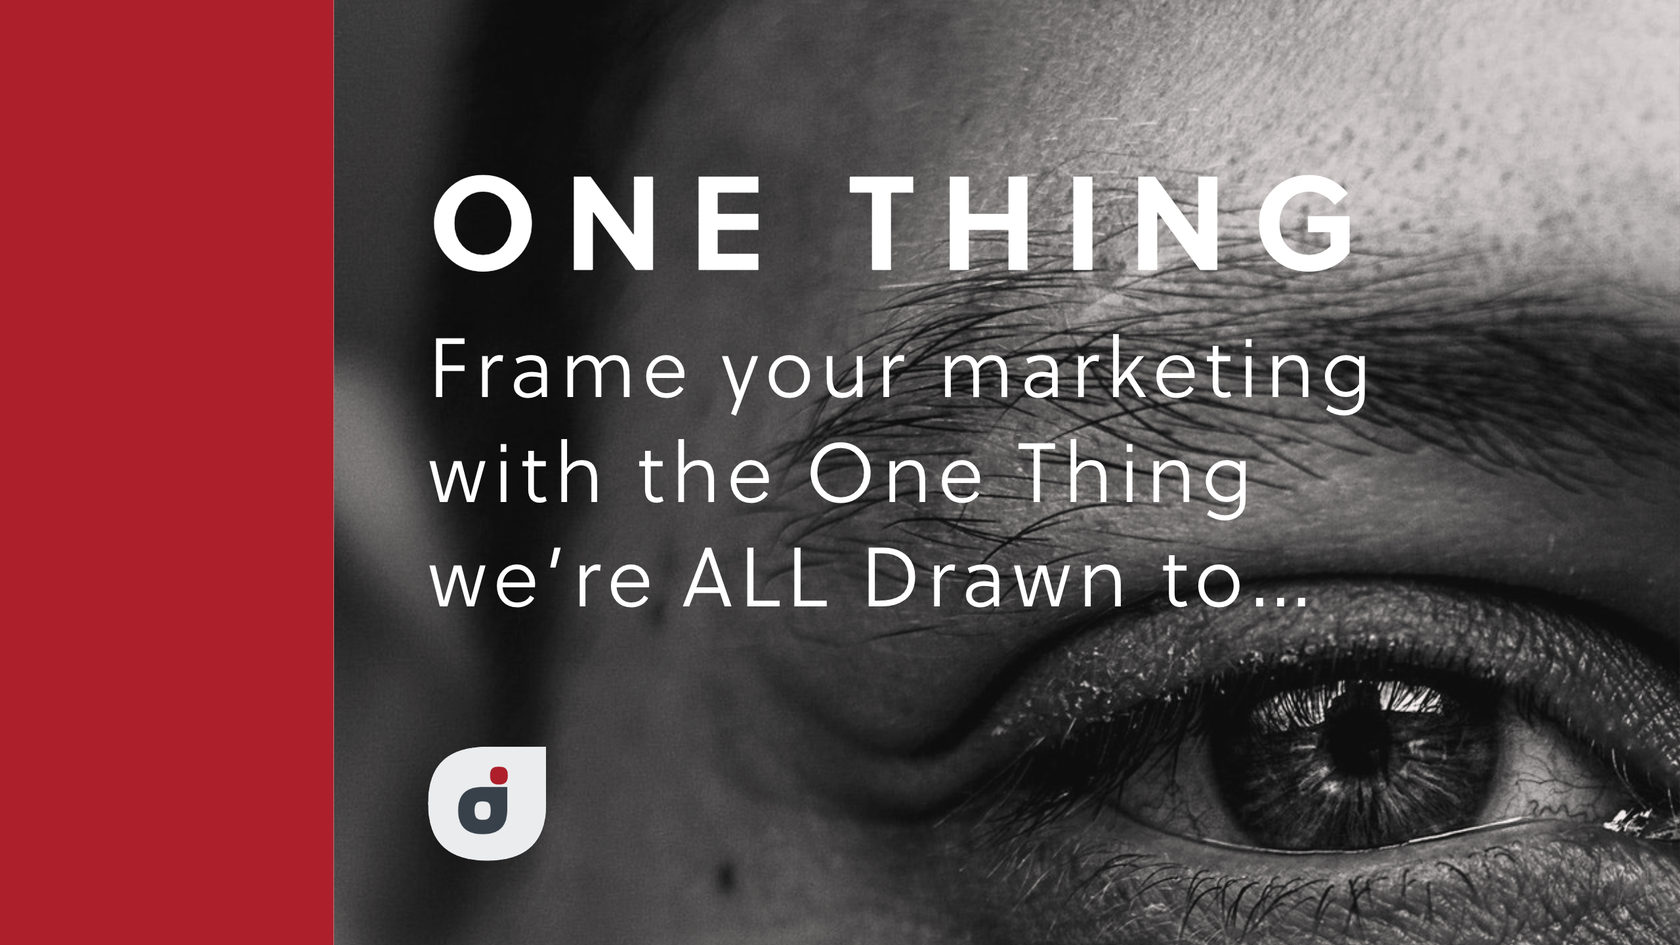 Blog article title pic: Is Your Marketing Plan Framed With the One Thing We’re ALL Drawn To?